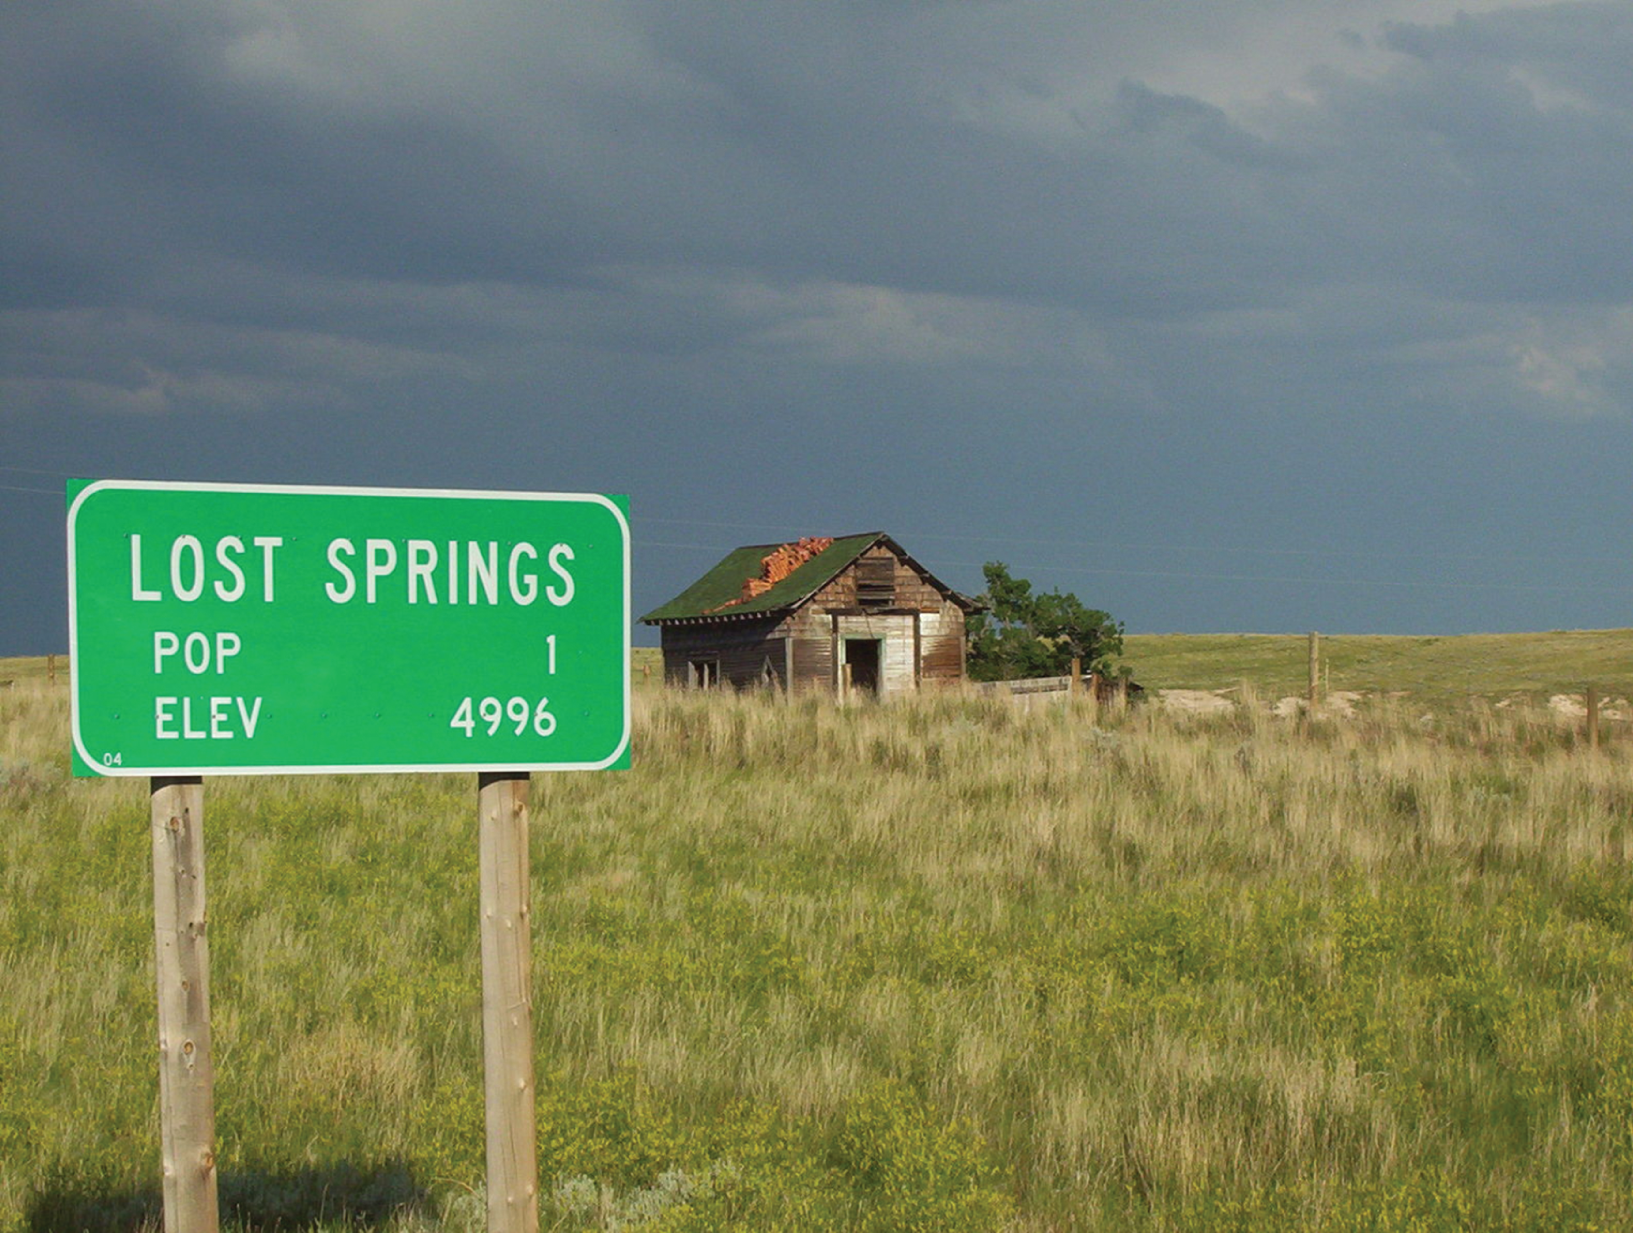 Photograph depicting a  traffic sign welcoming drivers to Lost Springs, Wyoming.